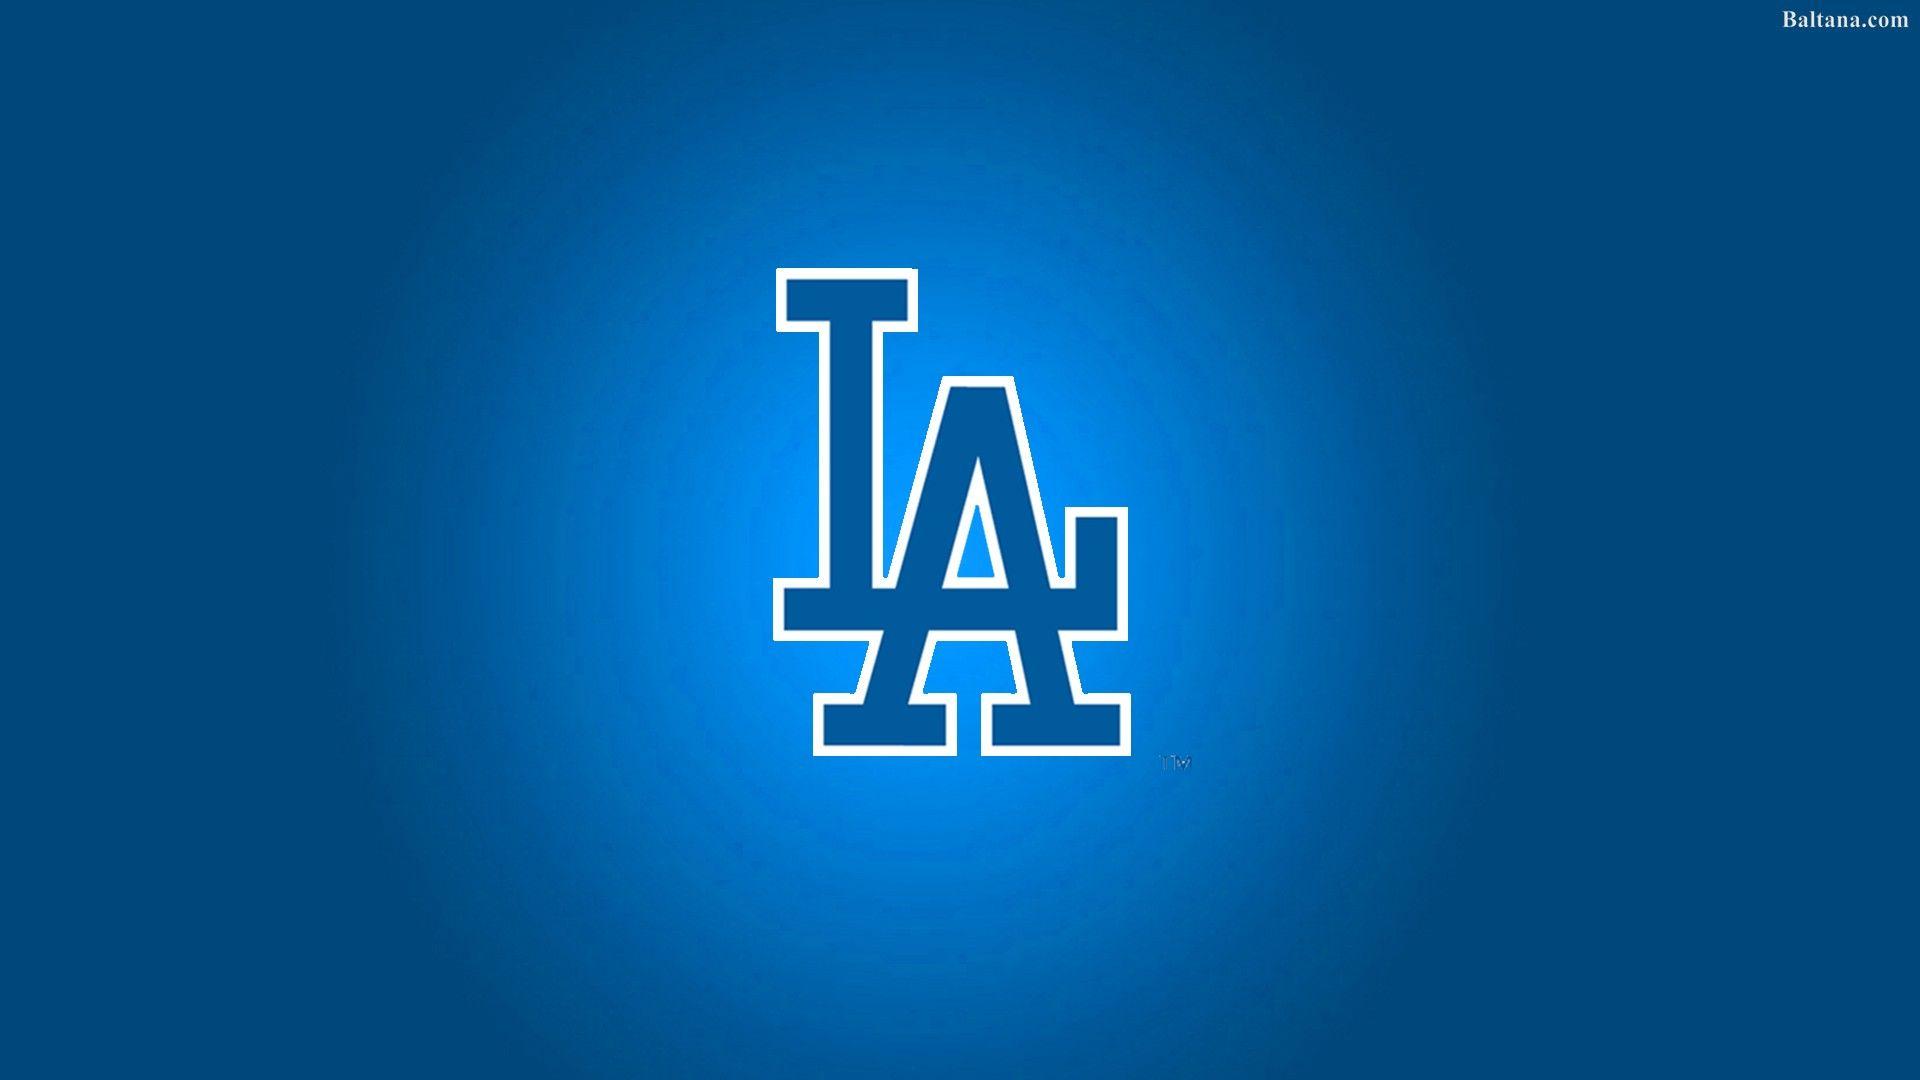 Los Angeles Dodgers 2019 Wallpapers - Wallpaper Cave